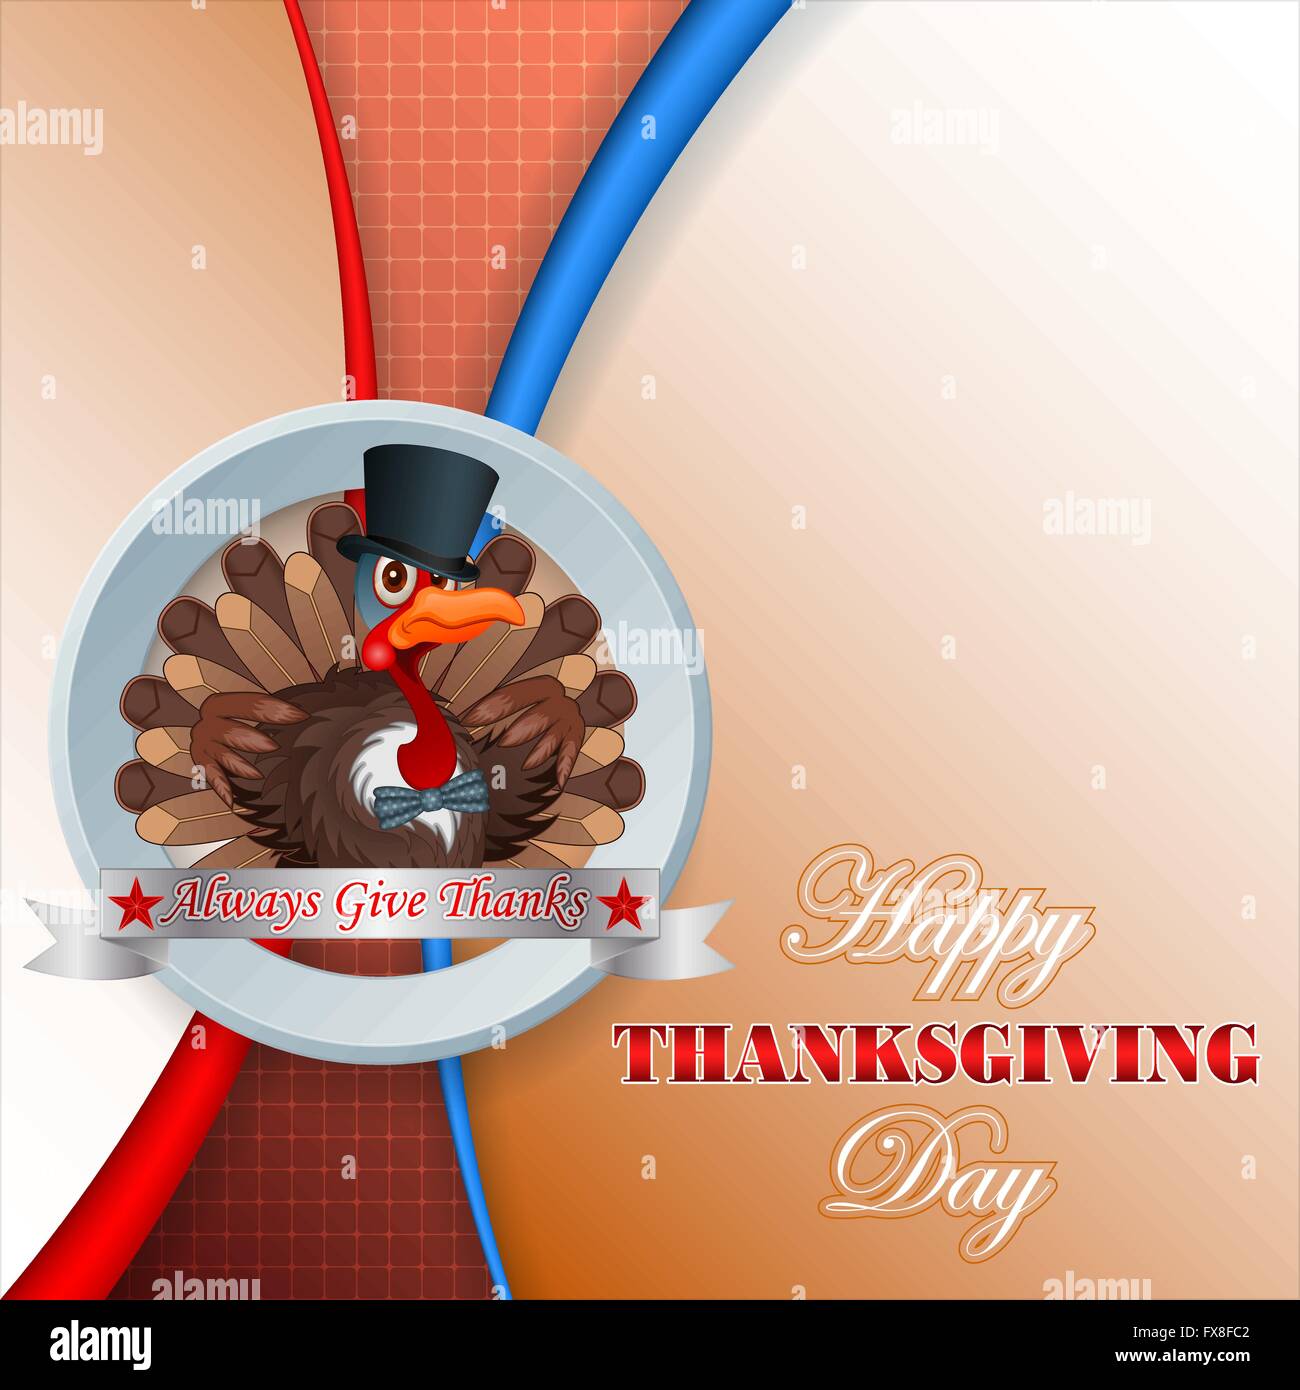 Happy Thanksgiving design with cartoon turkey very proud of his appearance, wearing a top hat and bow tie Stock Vector